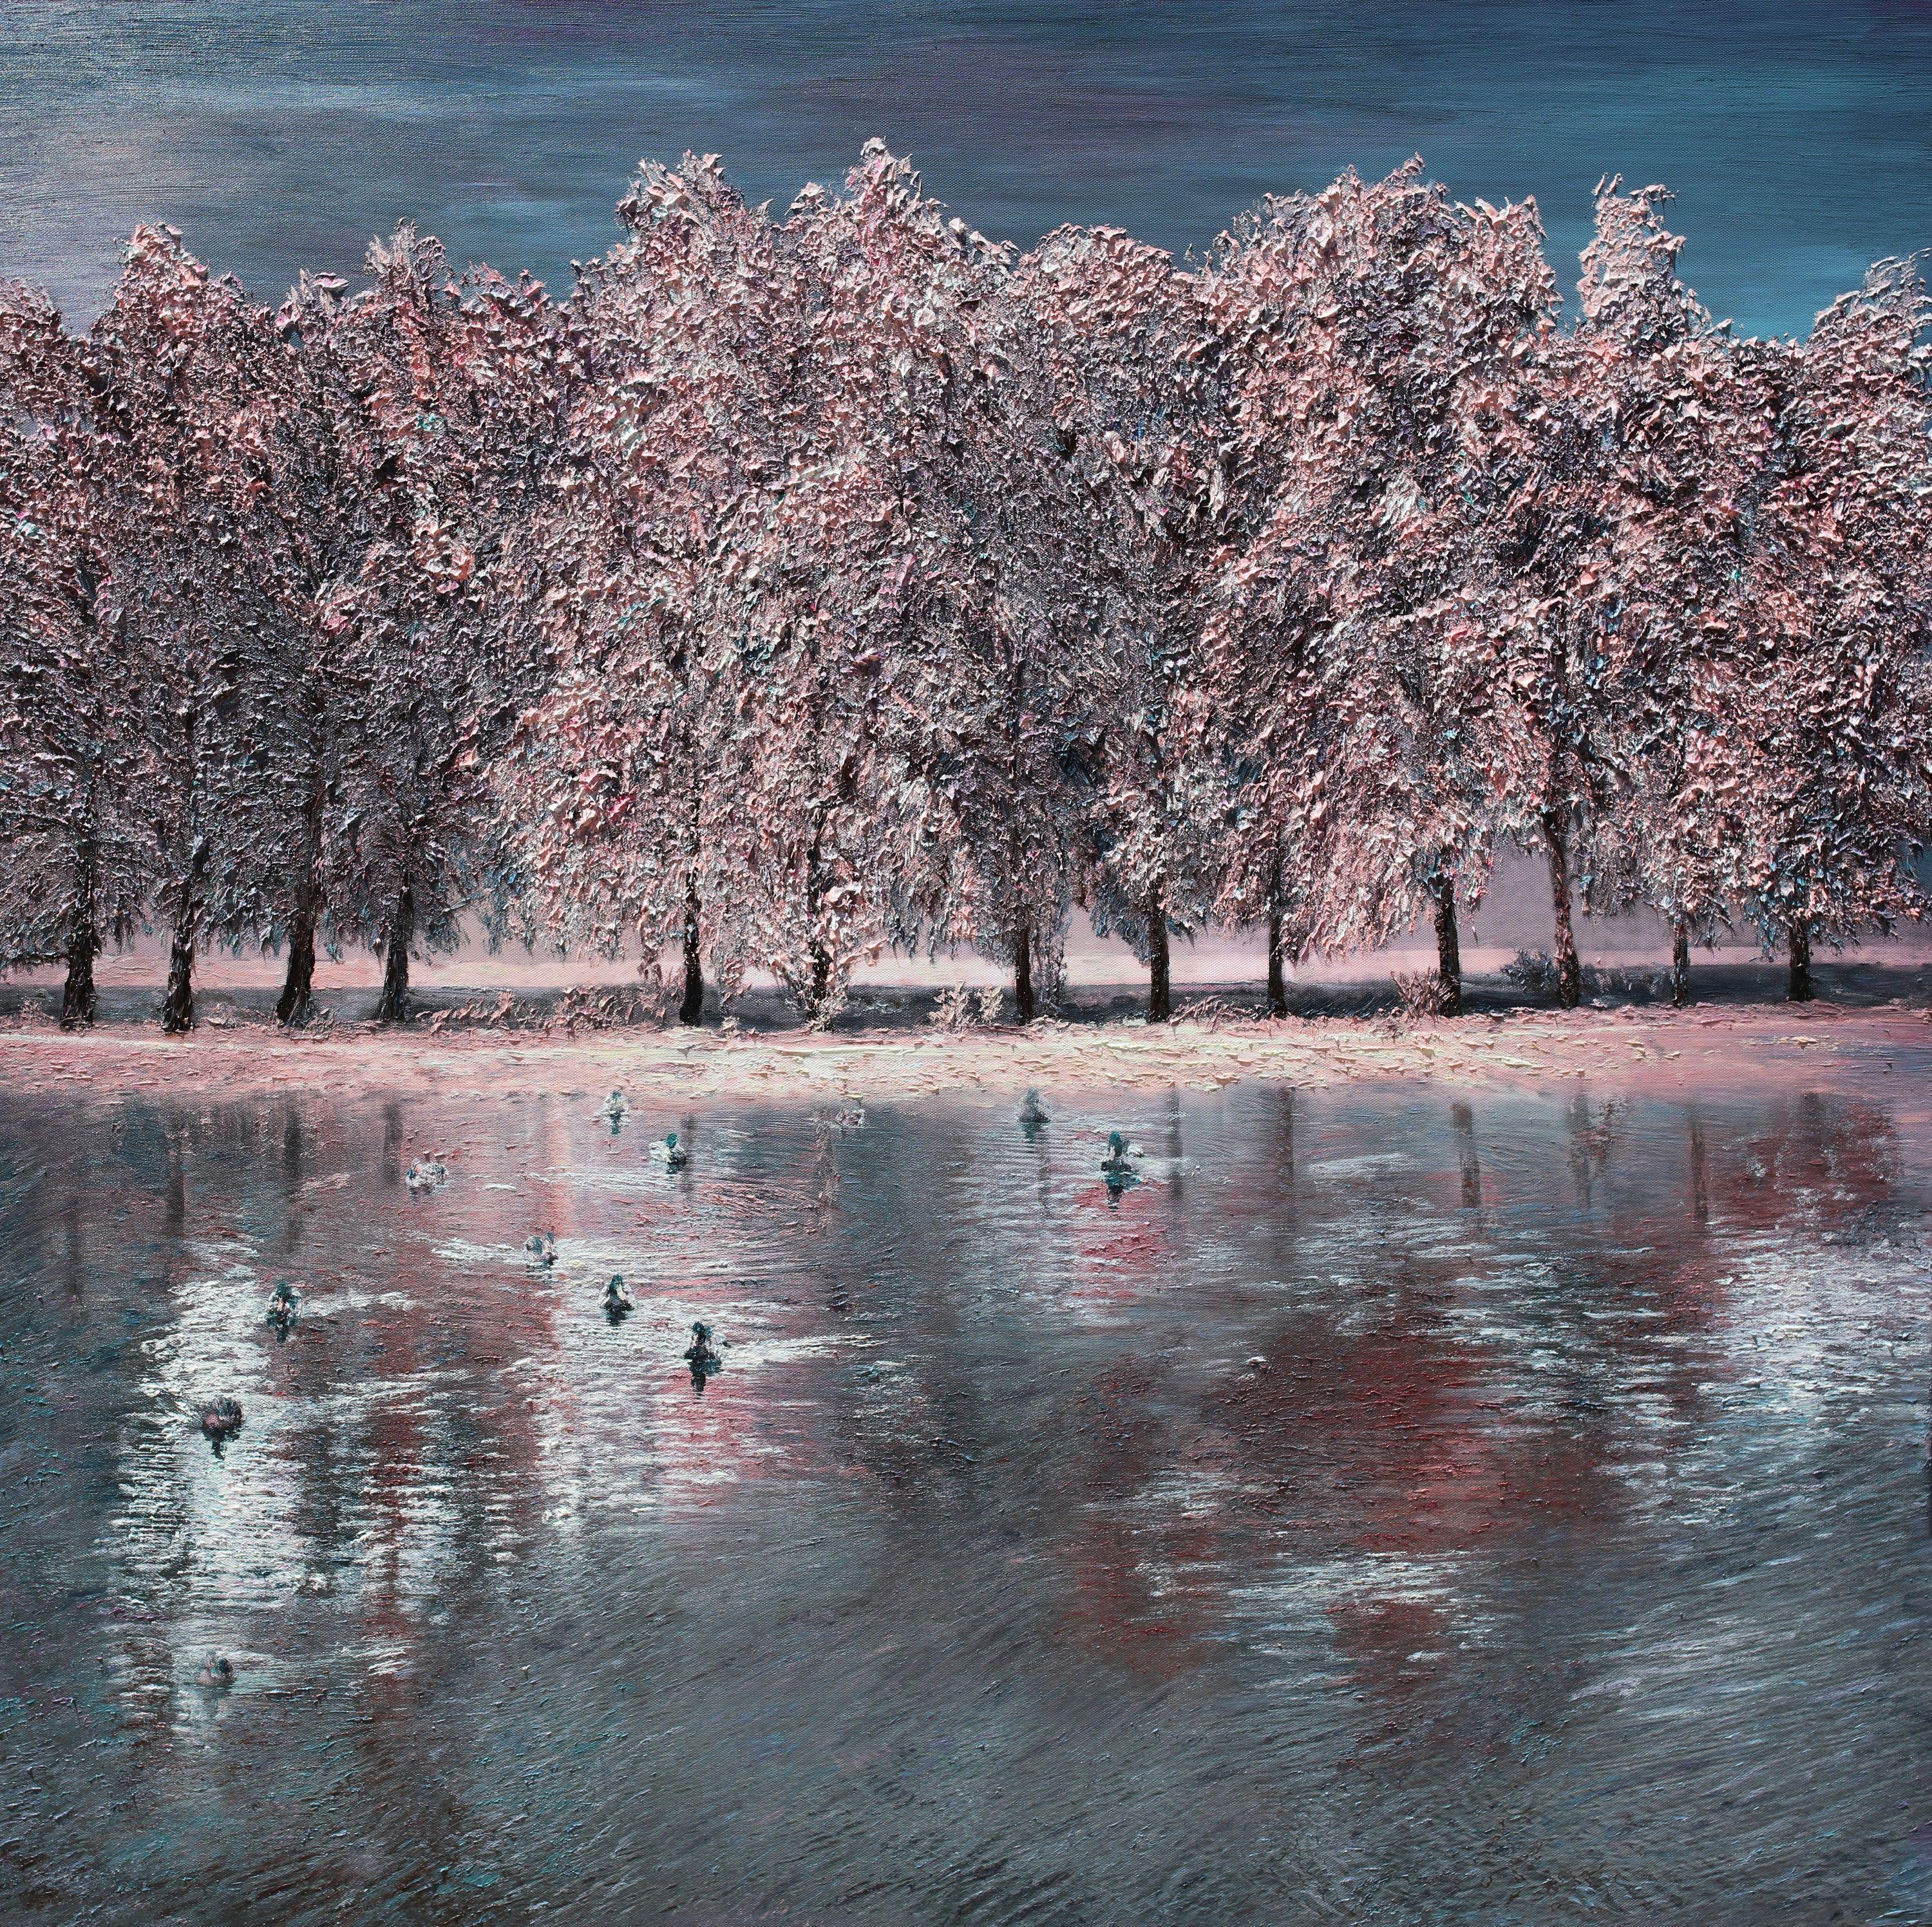 â€œCombining the warmth of coral with the delicacy of pink, this soothing hue is chic to decorate any home. Rustling the wildlife in the awakening of spring gently ushers in the tone of rebirth. The feeling is serenity.  The painting is executed in